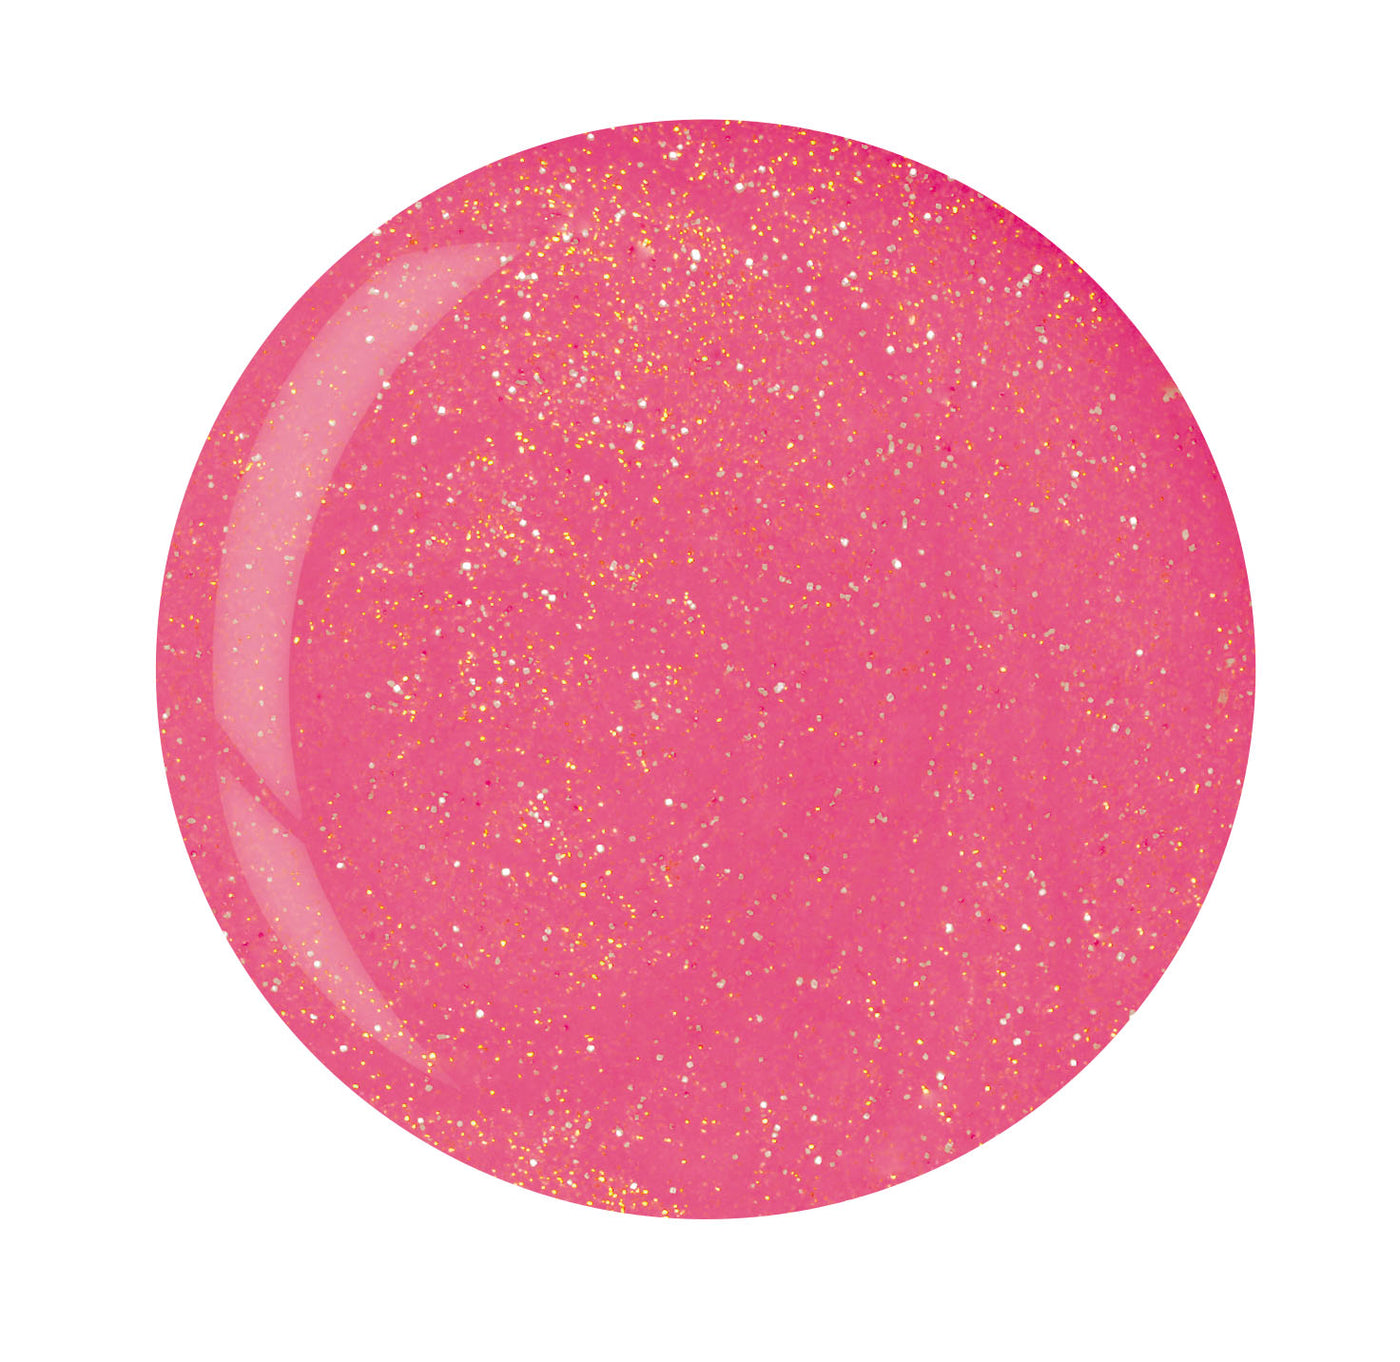 CP Dipping Powder14g - 5588-5 Bright Pink W/ Gold Mica